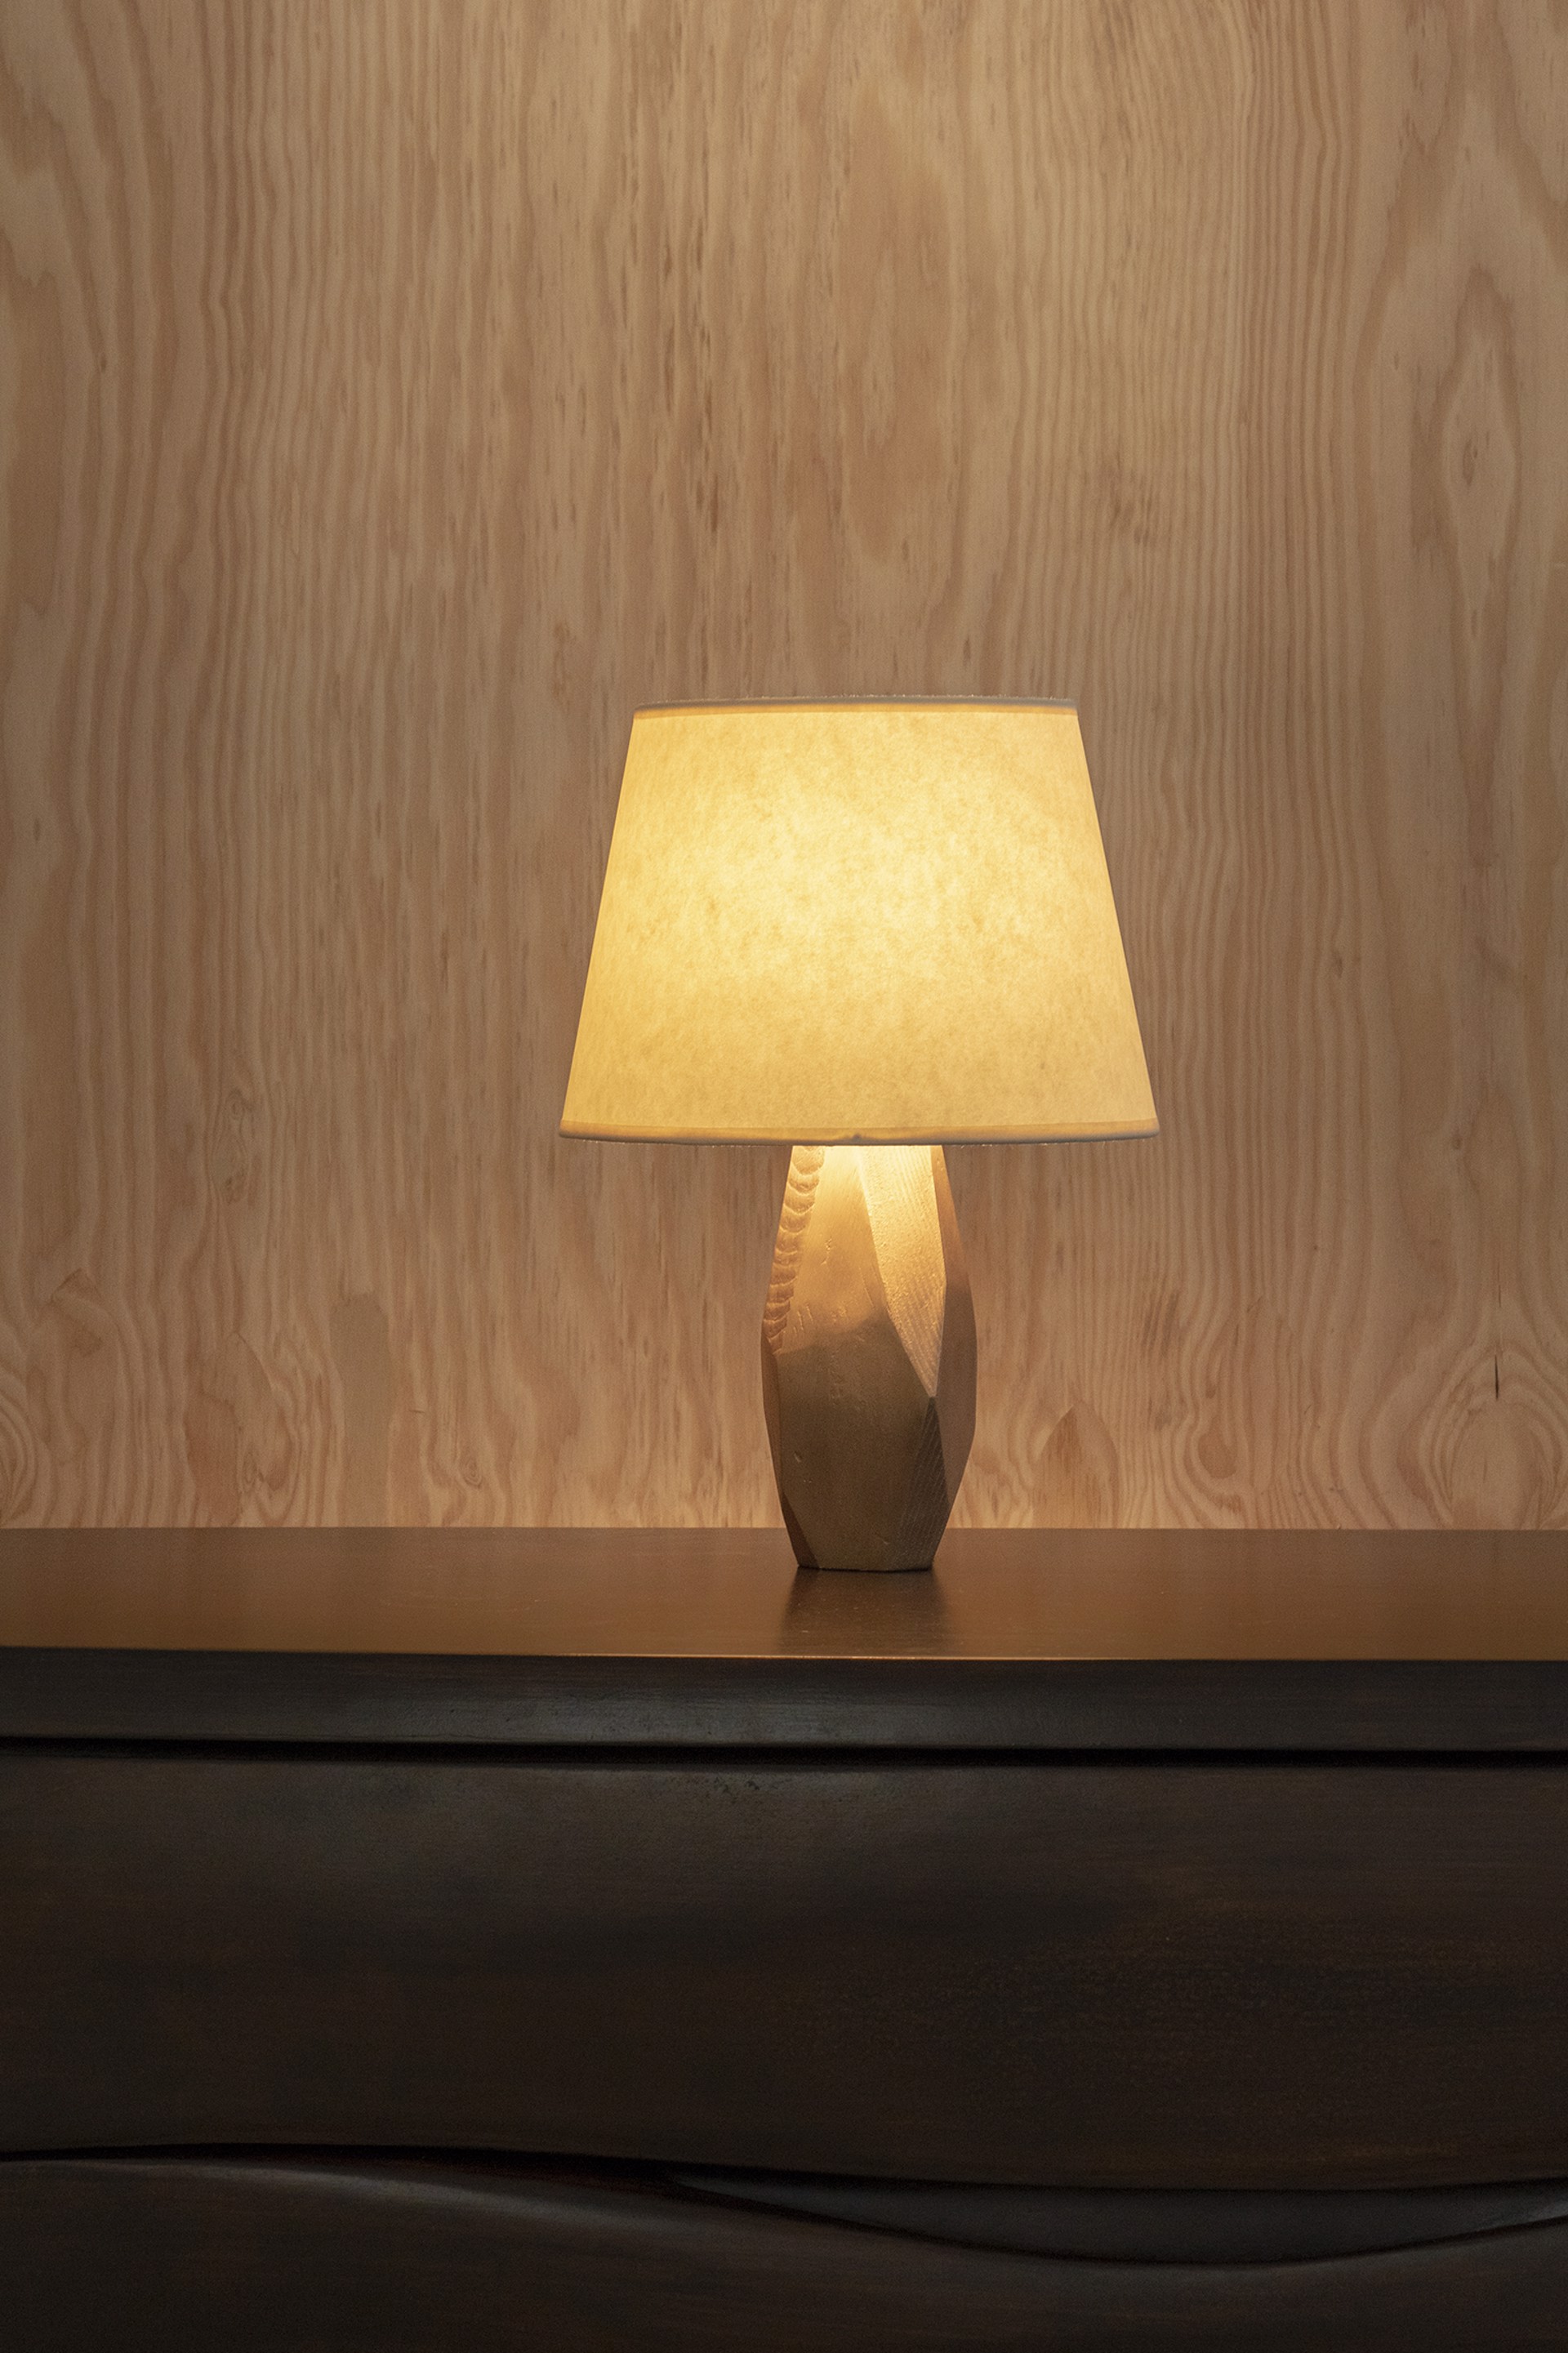 "Nazca" Table lamp by Jacques Jarrige